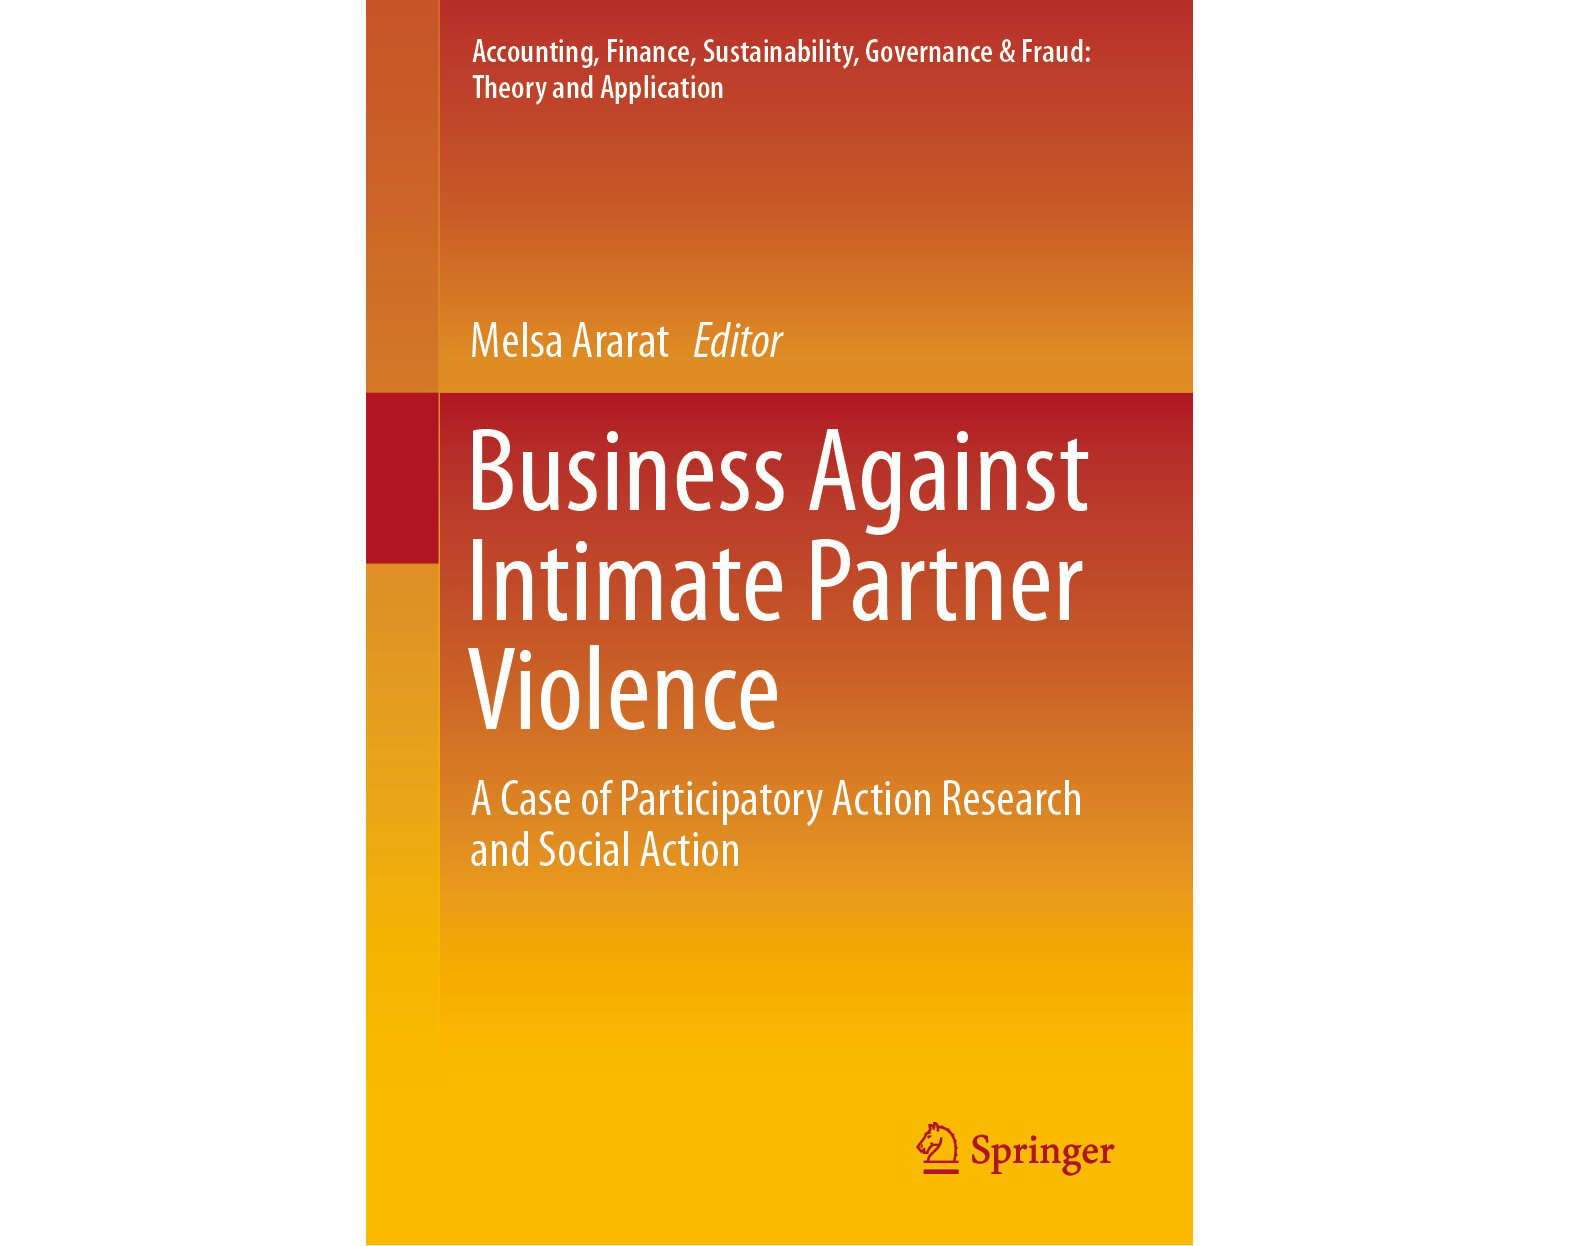 Business Against Intimate Partner Violence/A Case of Participatory Action Research and Social